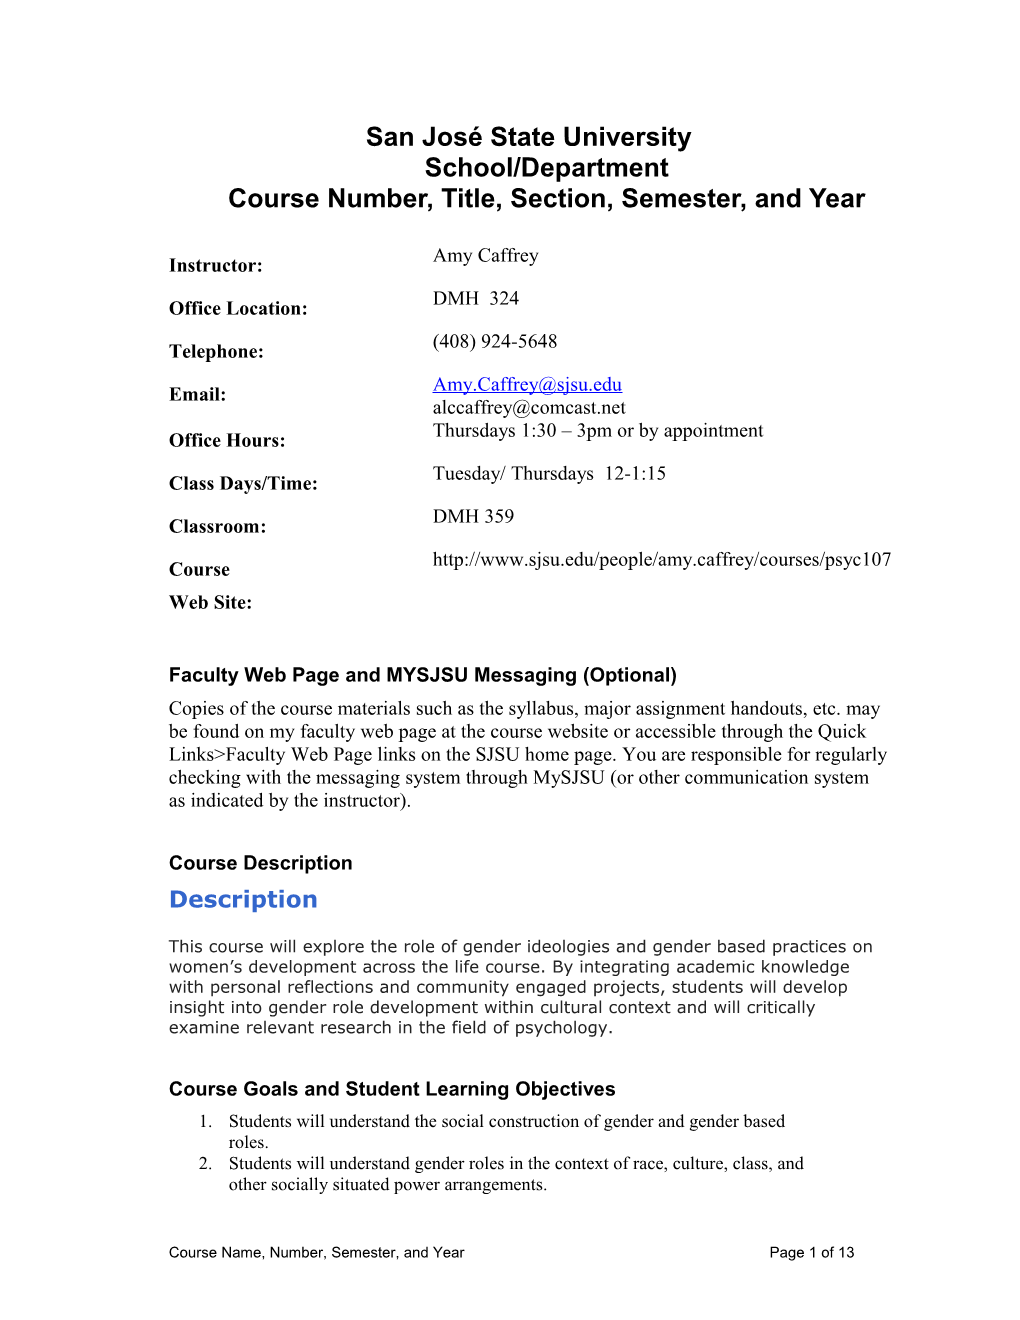 Accessible Syllabus Template s7